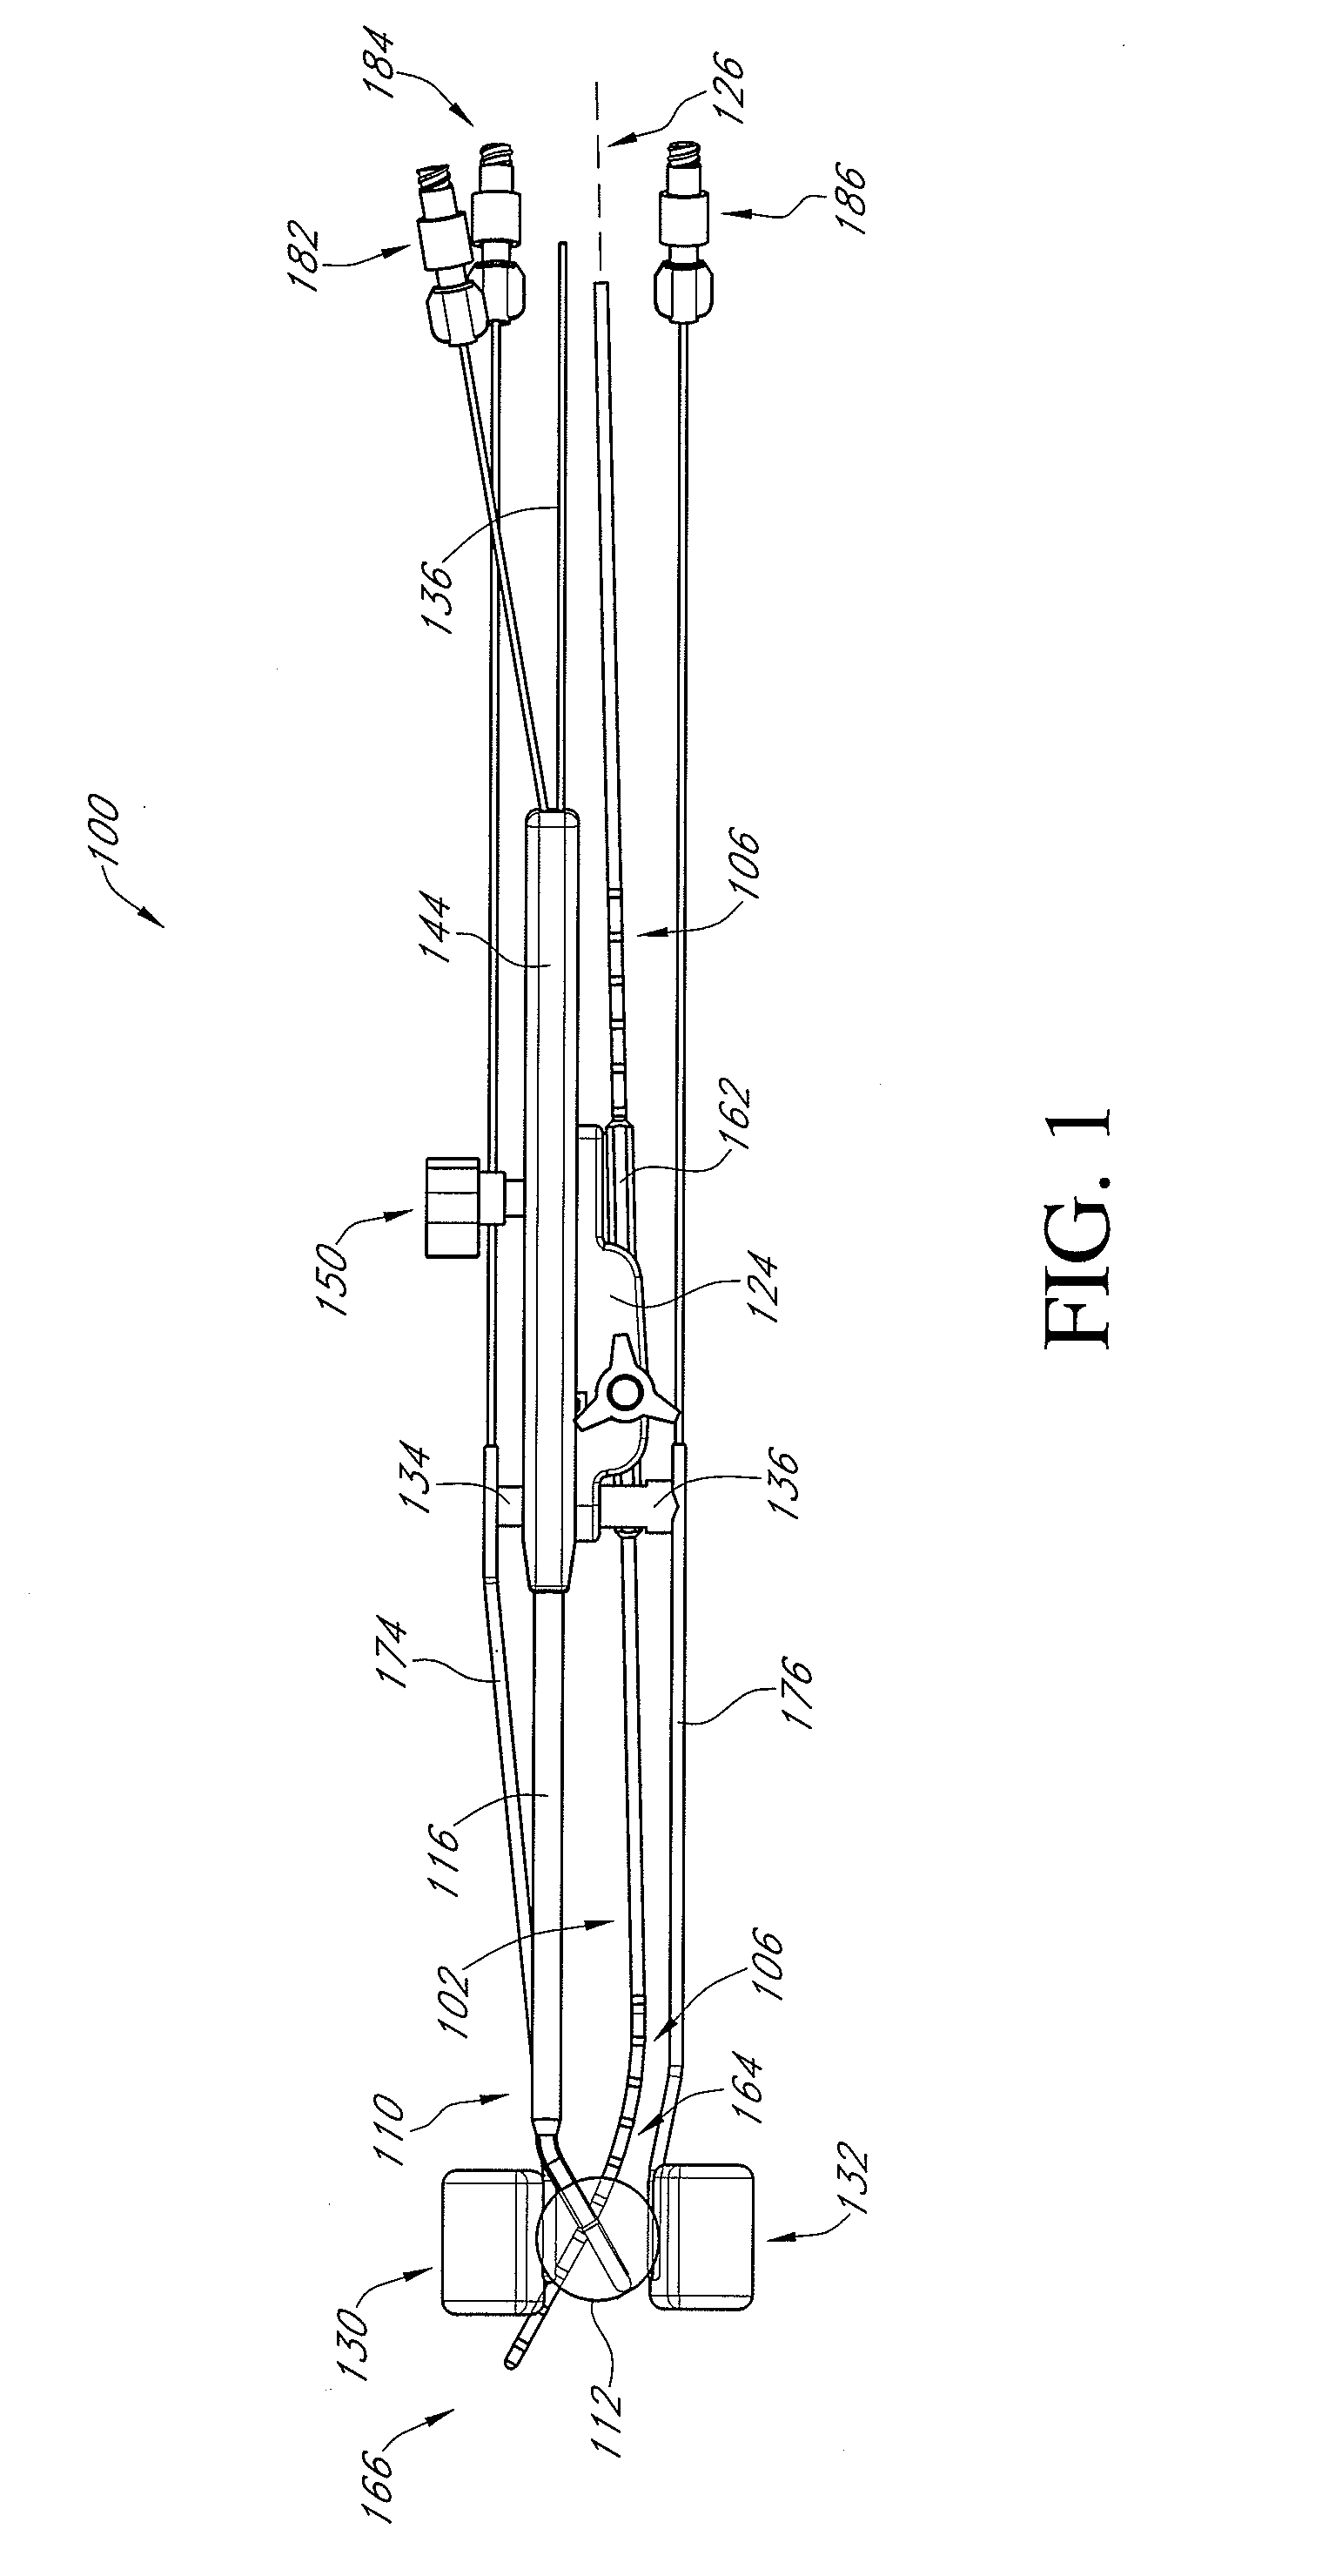 Systems and methods for treating cancer using brachytherapy